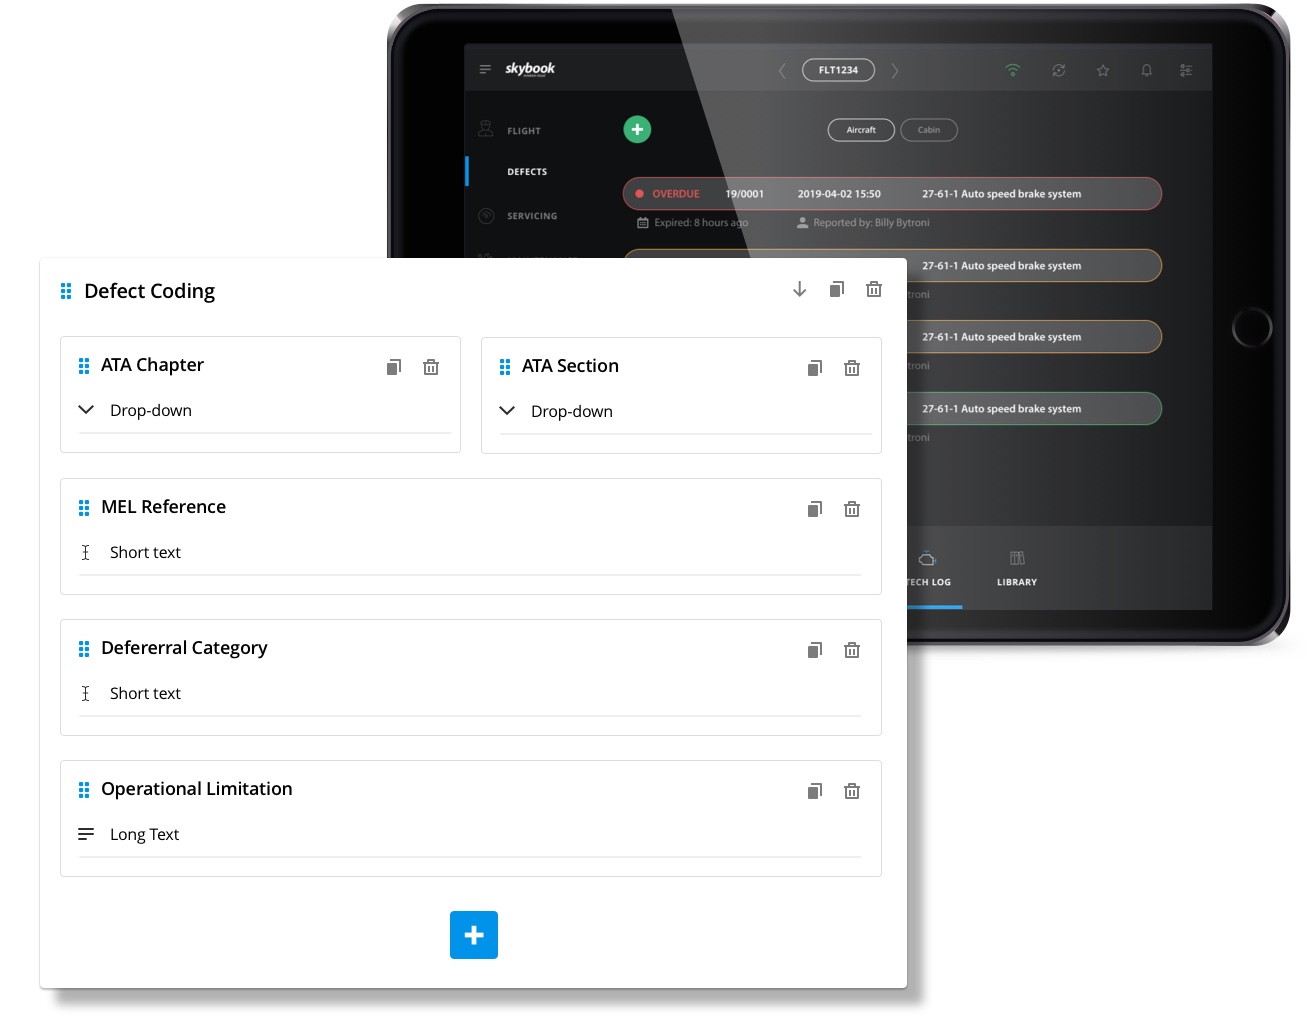 Improve flight deck communications with instant messaging